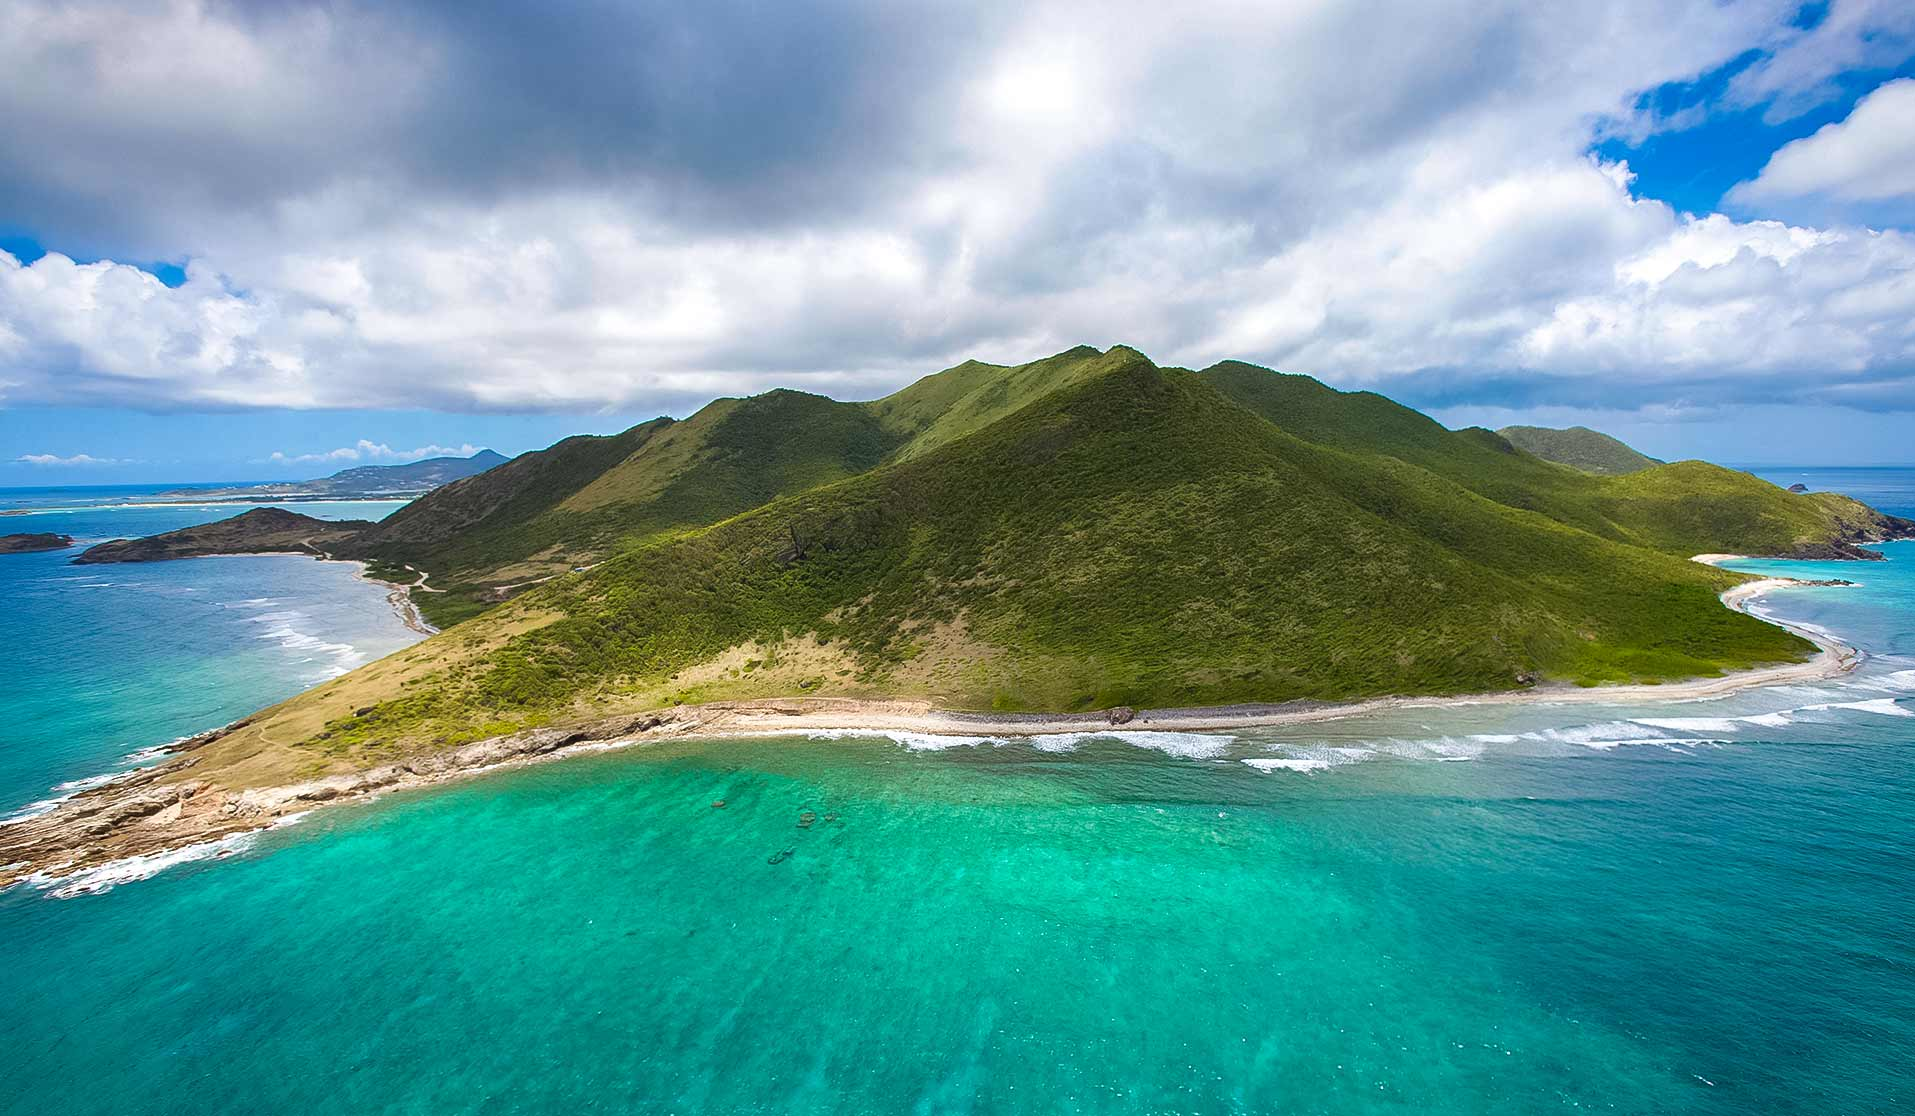 The Island of St. Kitts